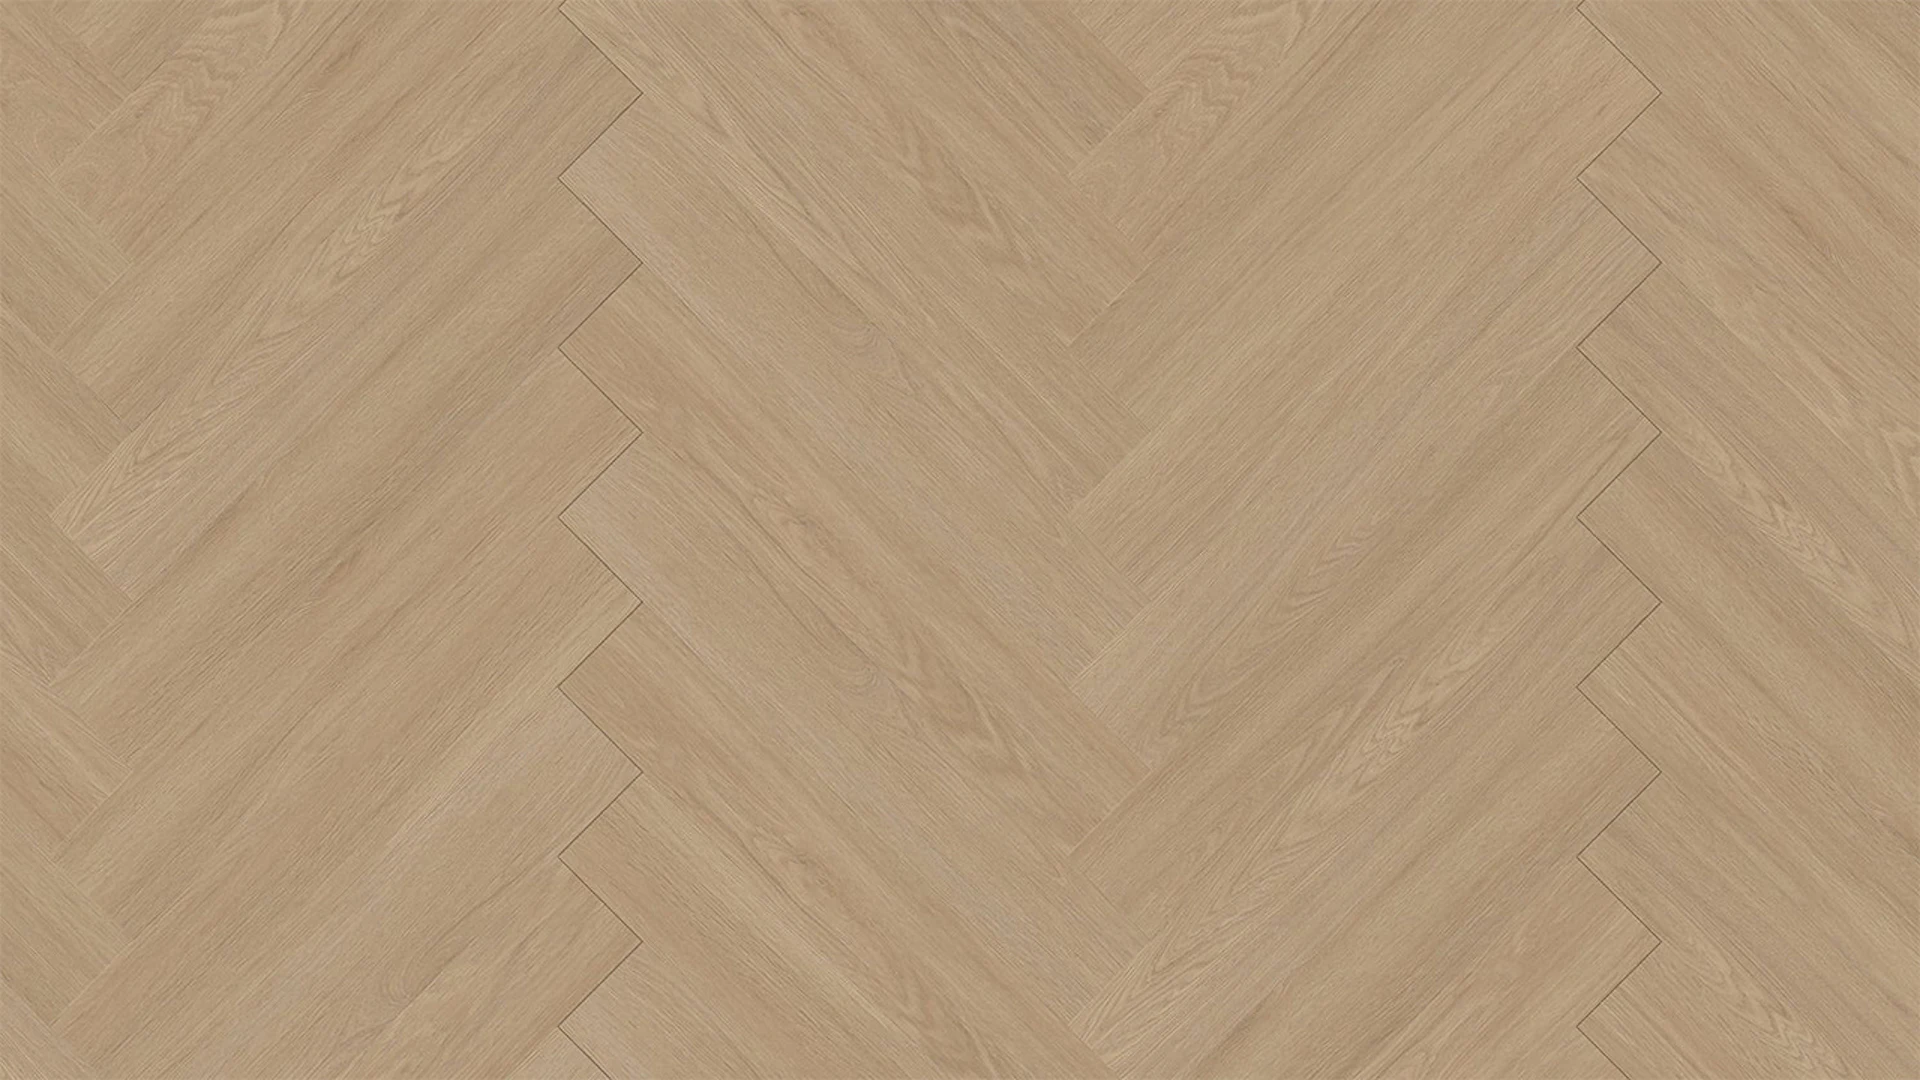 Gerflor adhesive vinyl - Virtuo 55 Glue Down HB Blomma natural | Authentic appearance (39201465)